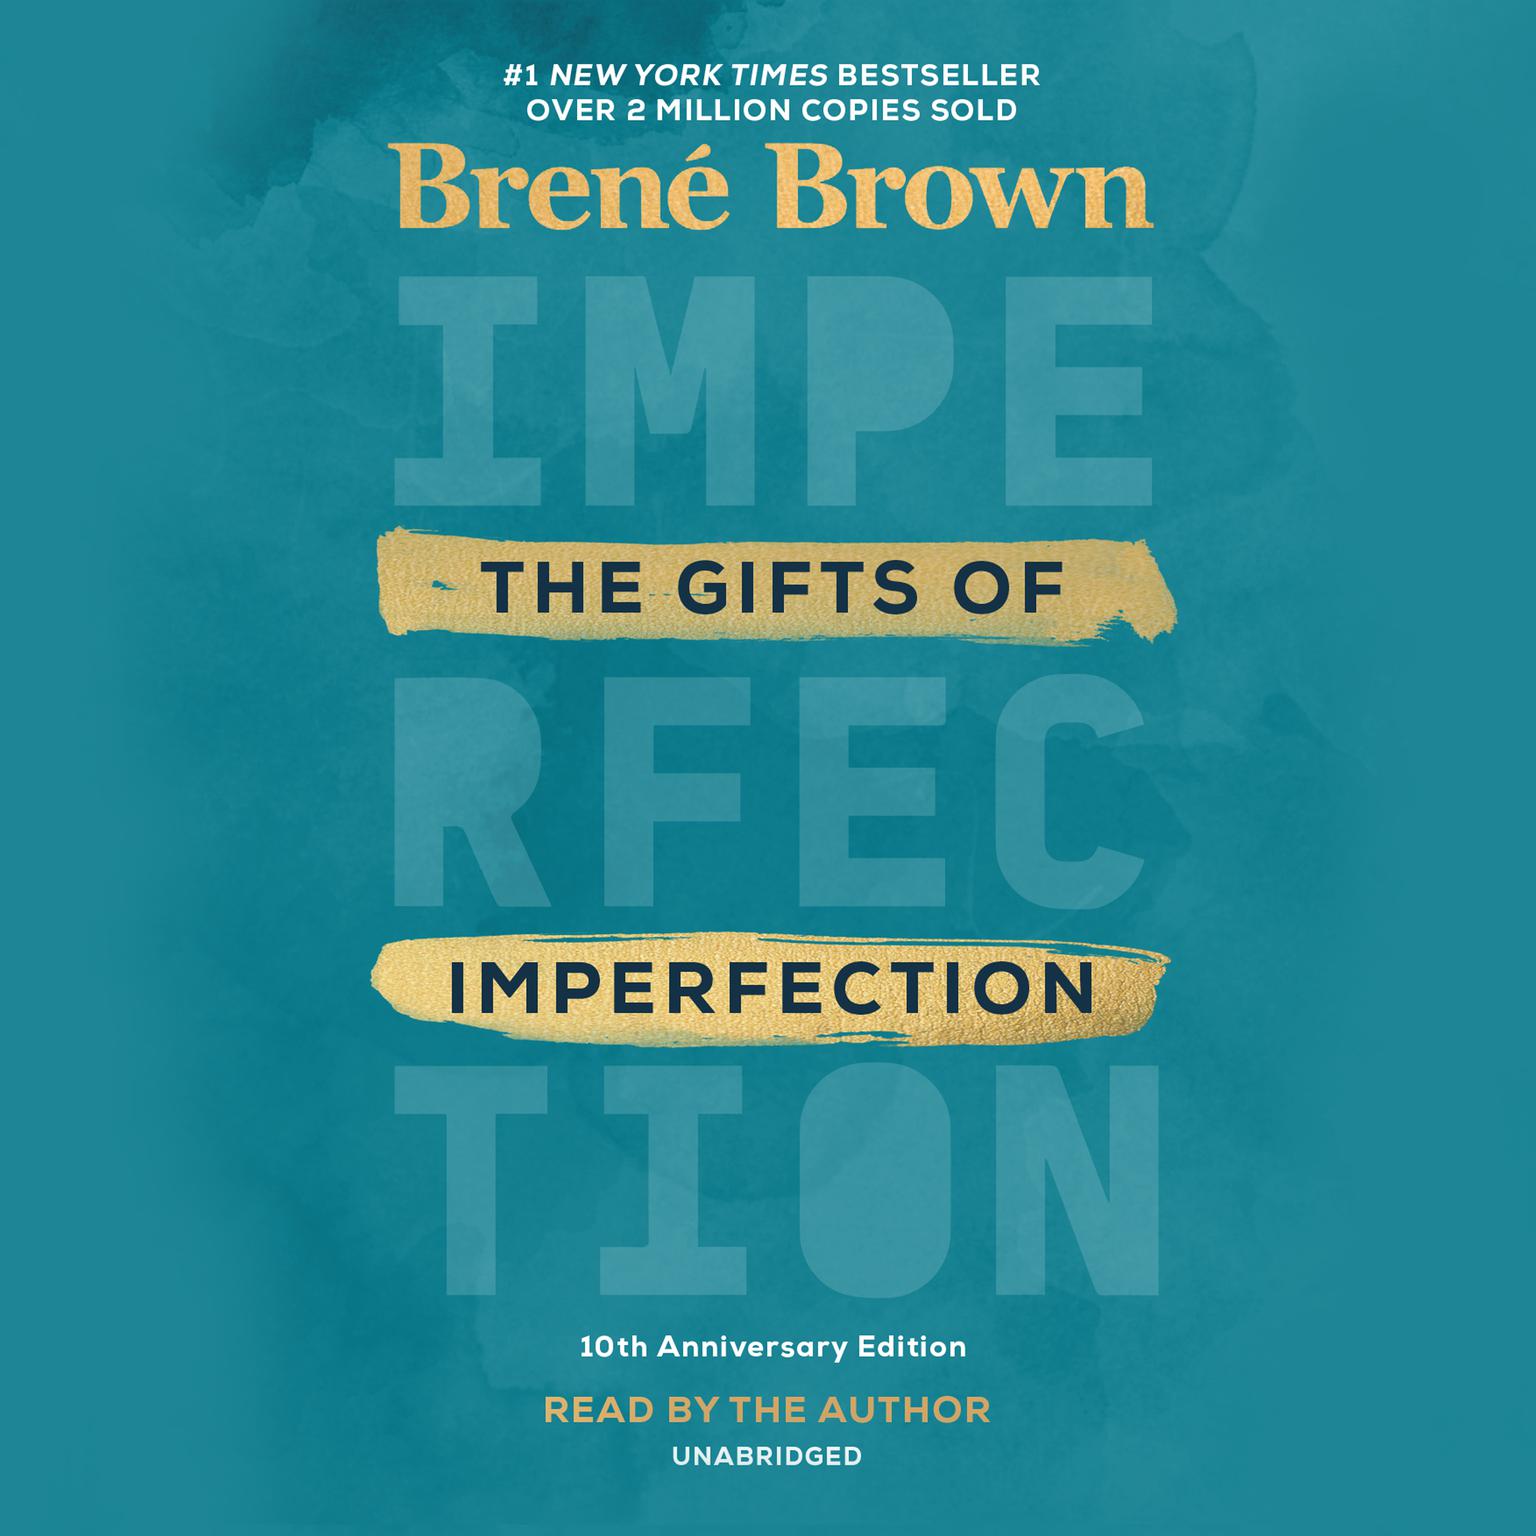 Gifts of Imperfection Book Review